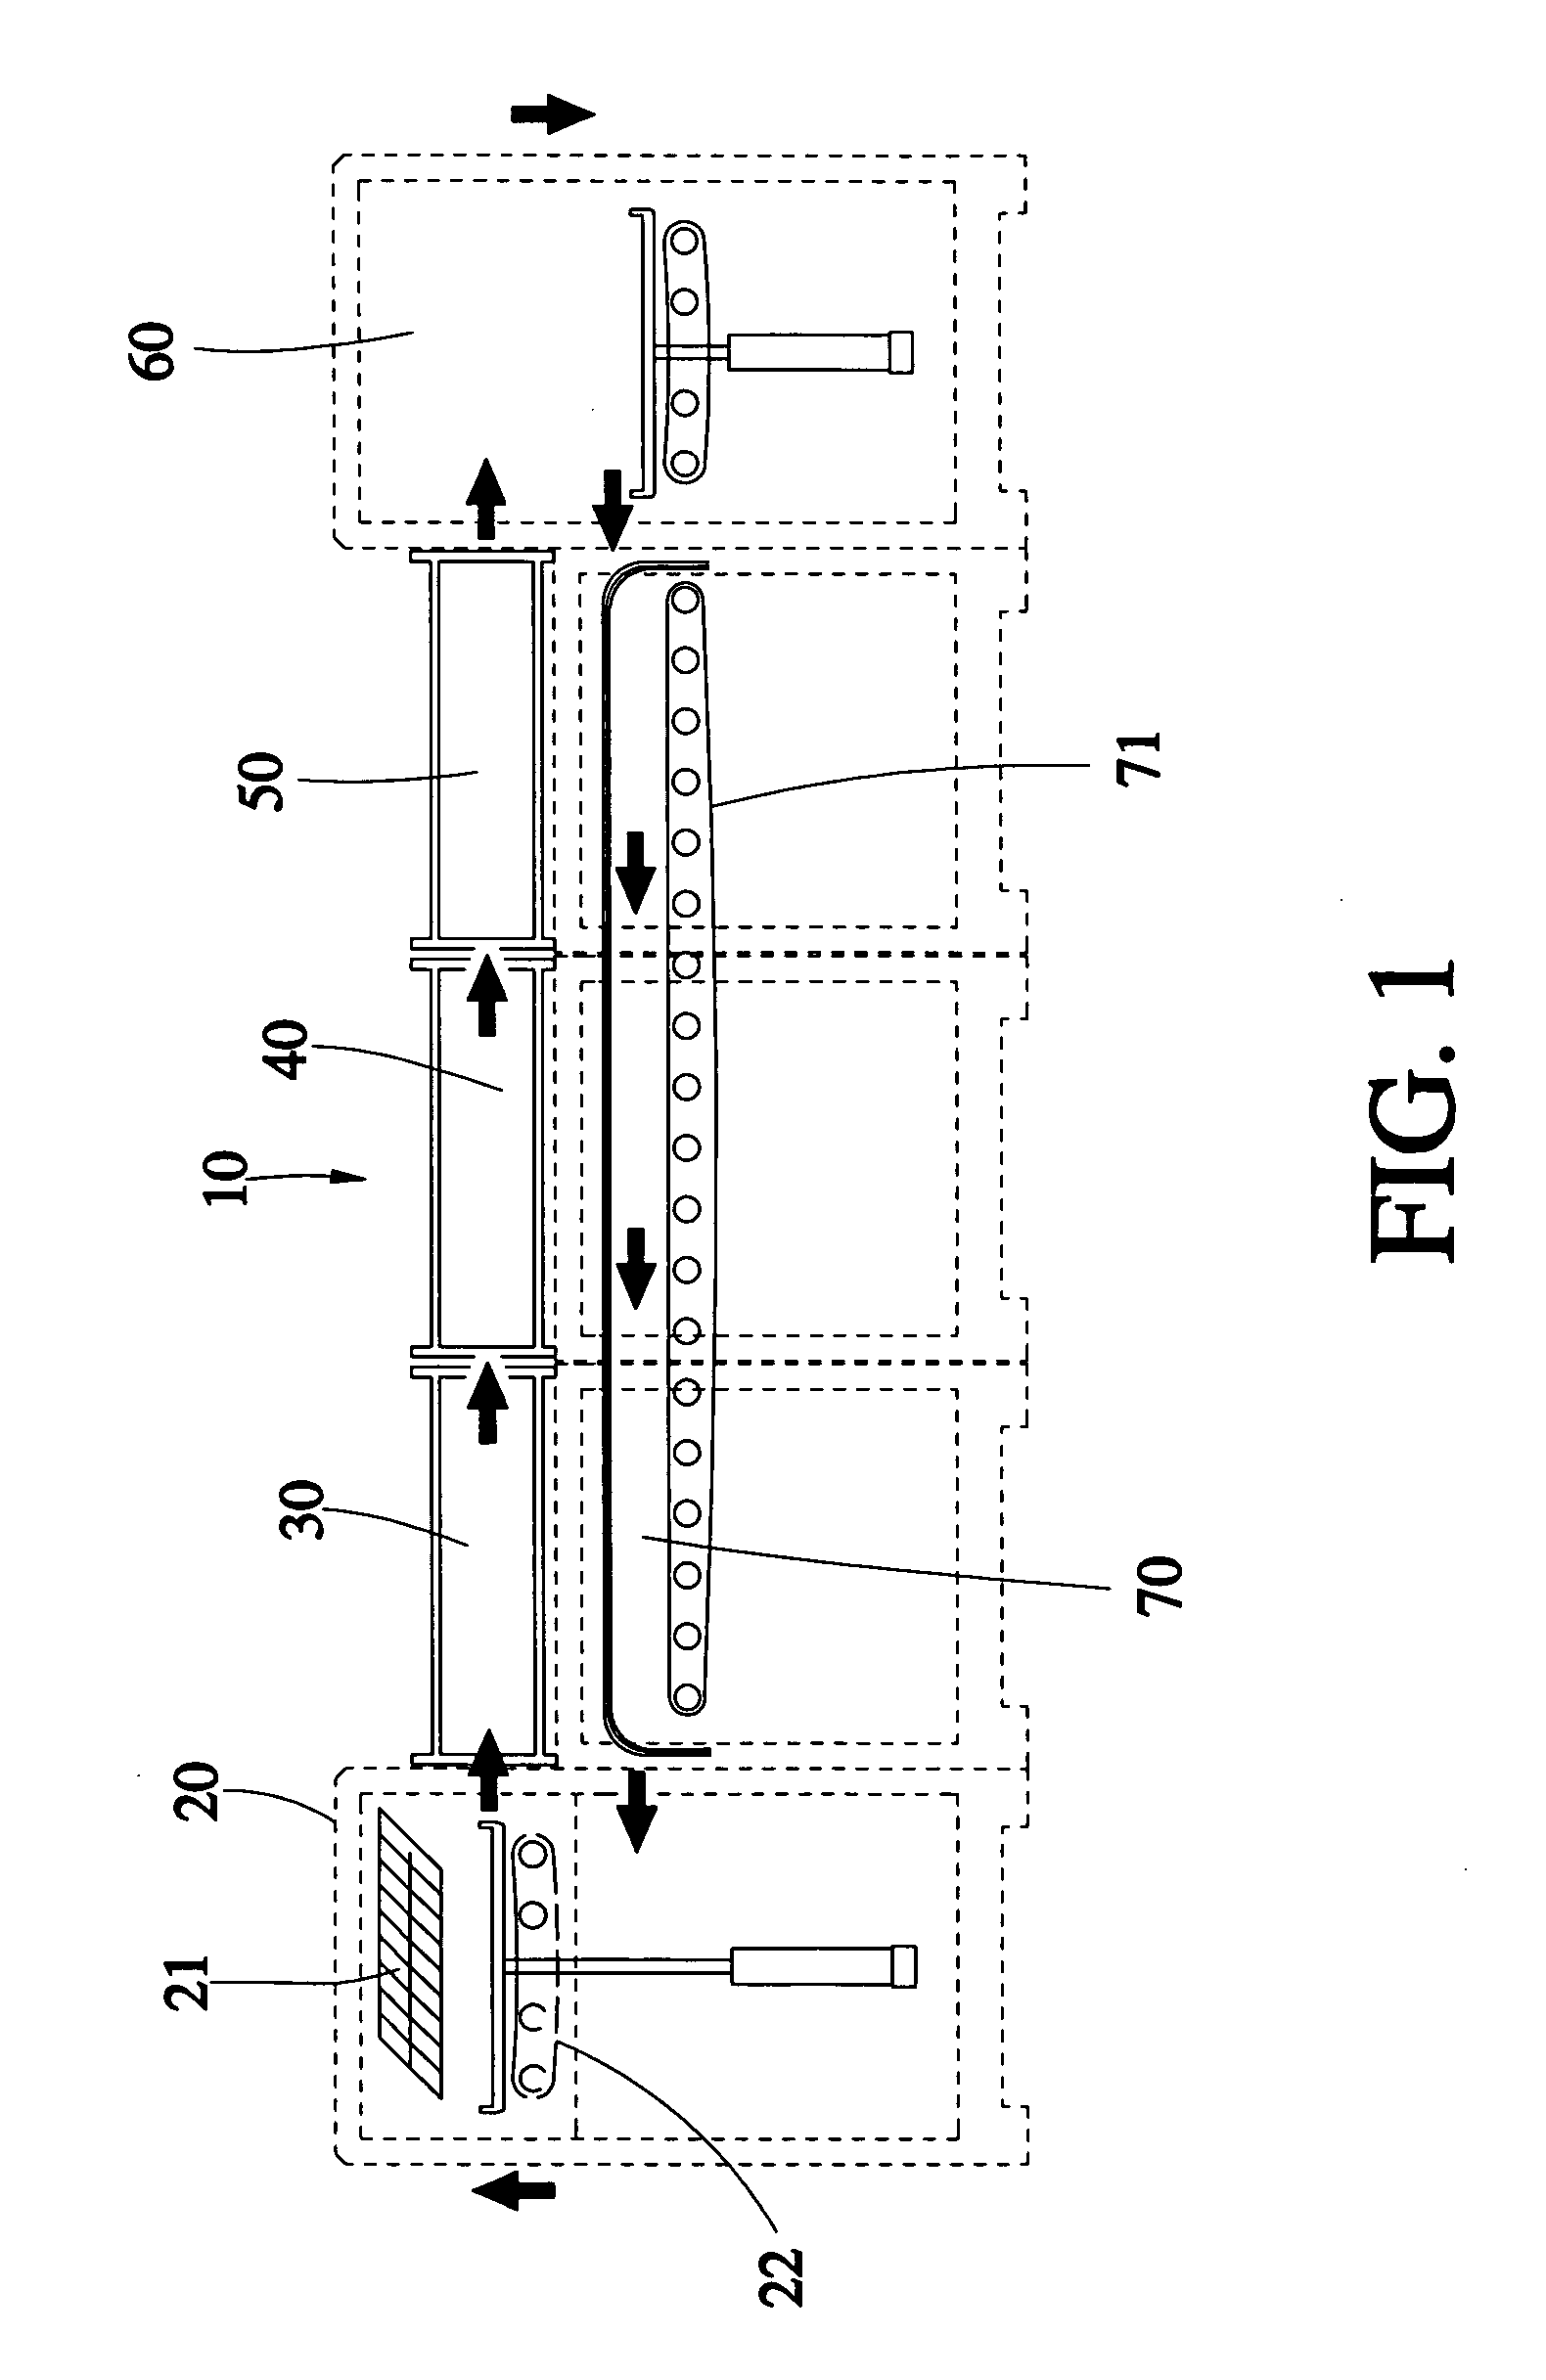 In-line coating/sputtering system with internal static electricity/dust removal and recycle apparatuses